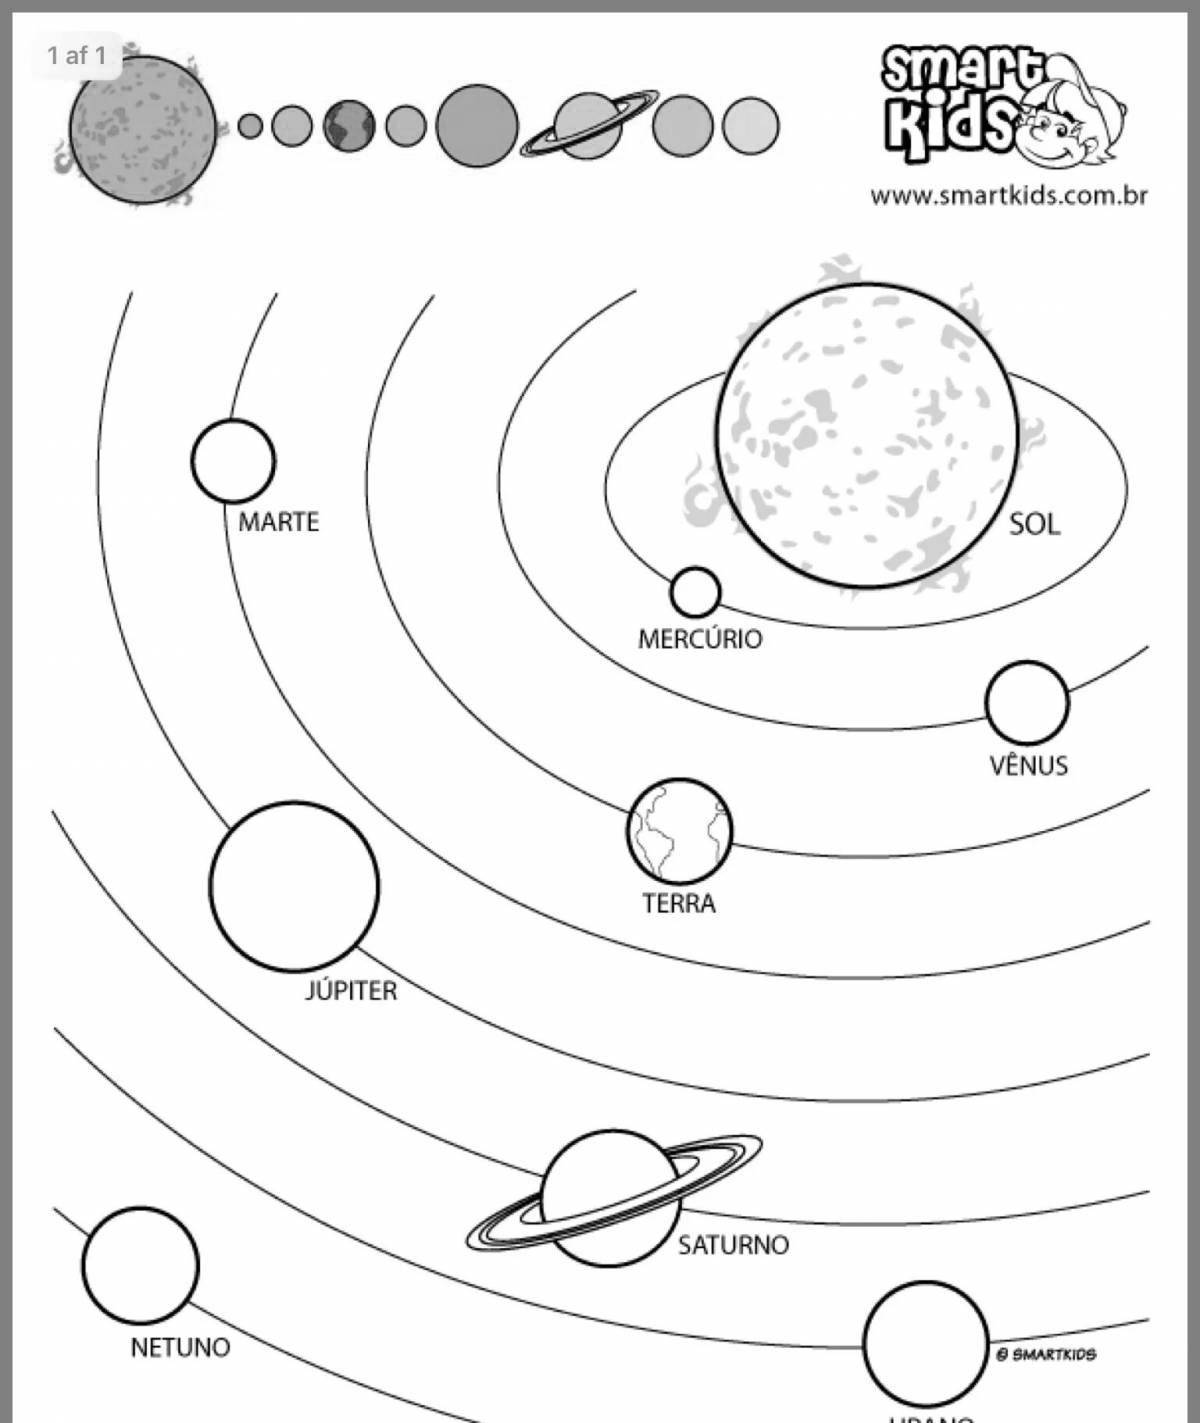 Solar system live coloring book